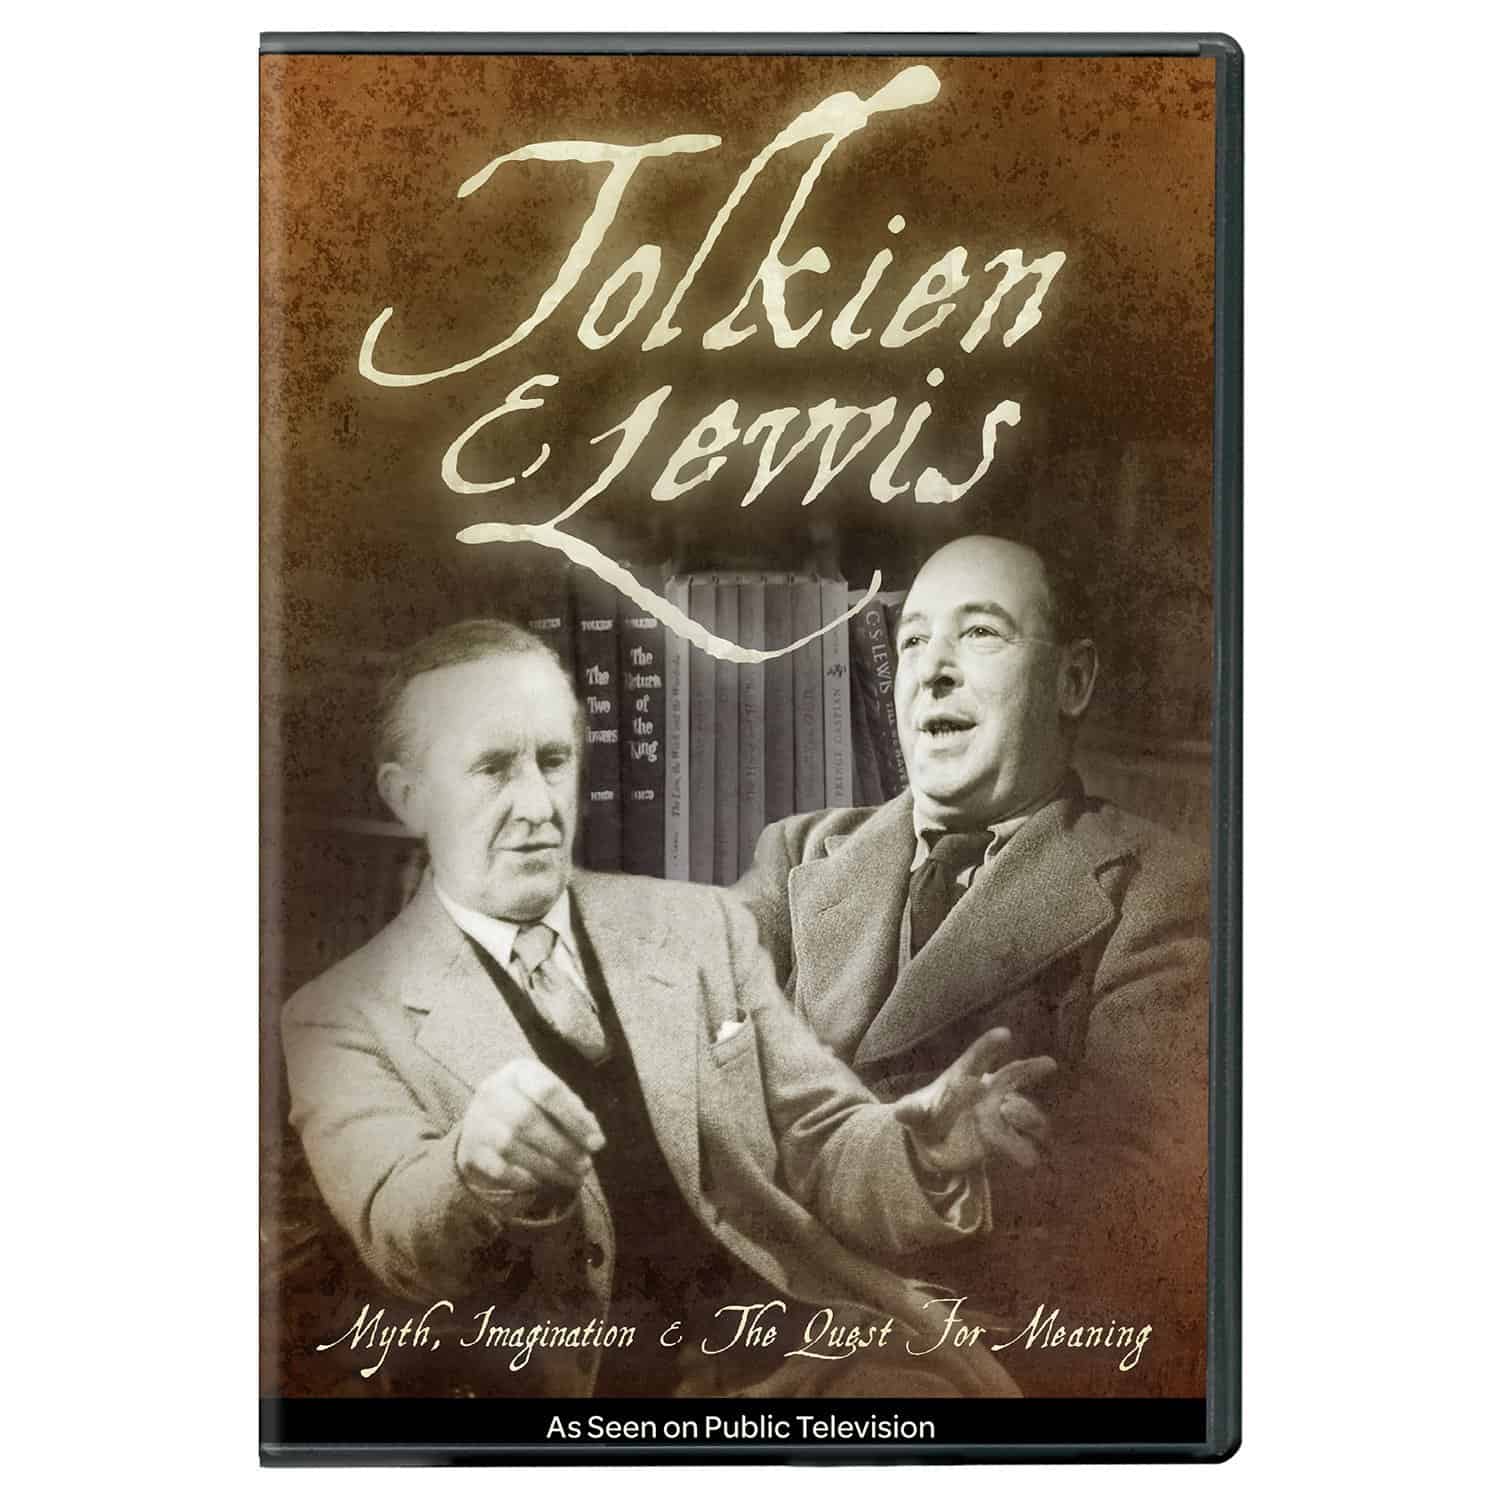 Tolkien and Lewis as Seen on Public Television